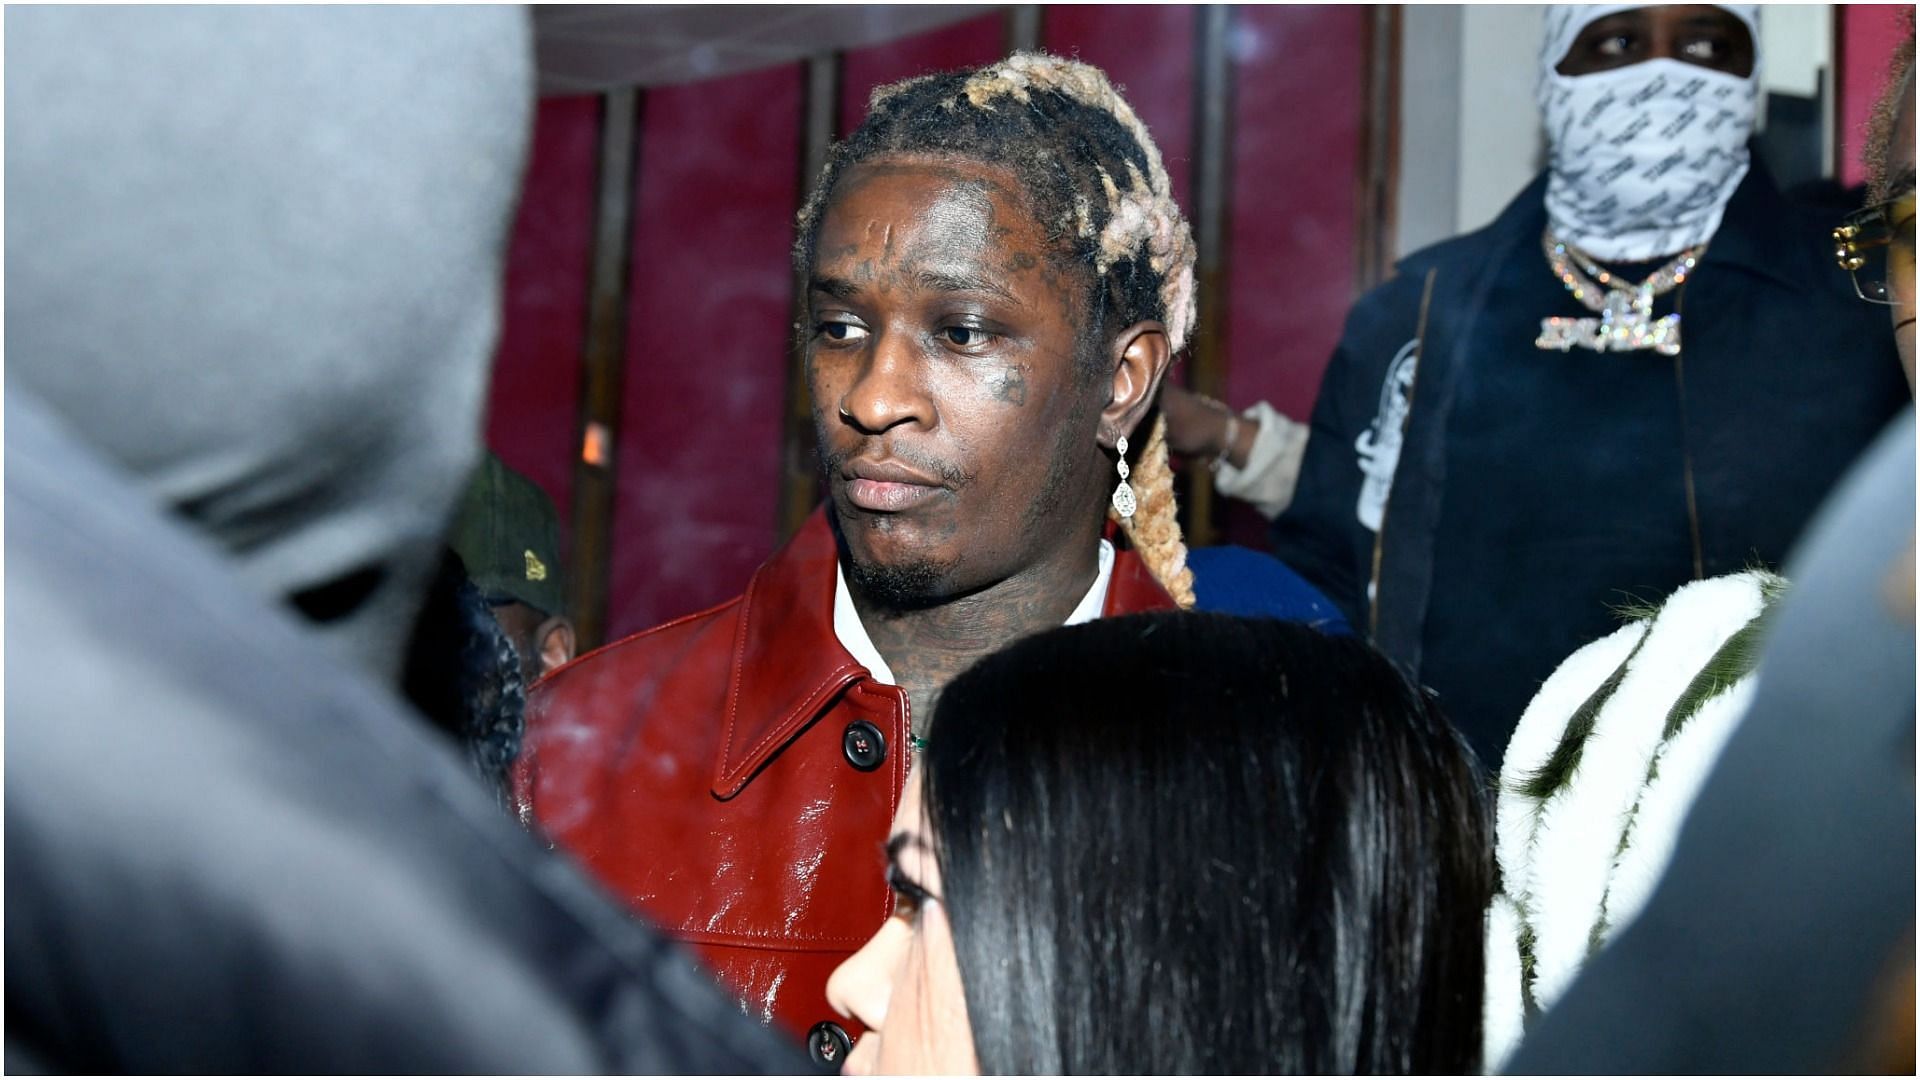 Young Thug attends a release party for his new album &ldquo;PUNK&rdquo; at Delilah on October 12, 2021, in West Hollywood, California (Image via Getty Images)